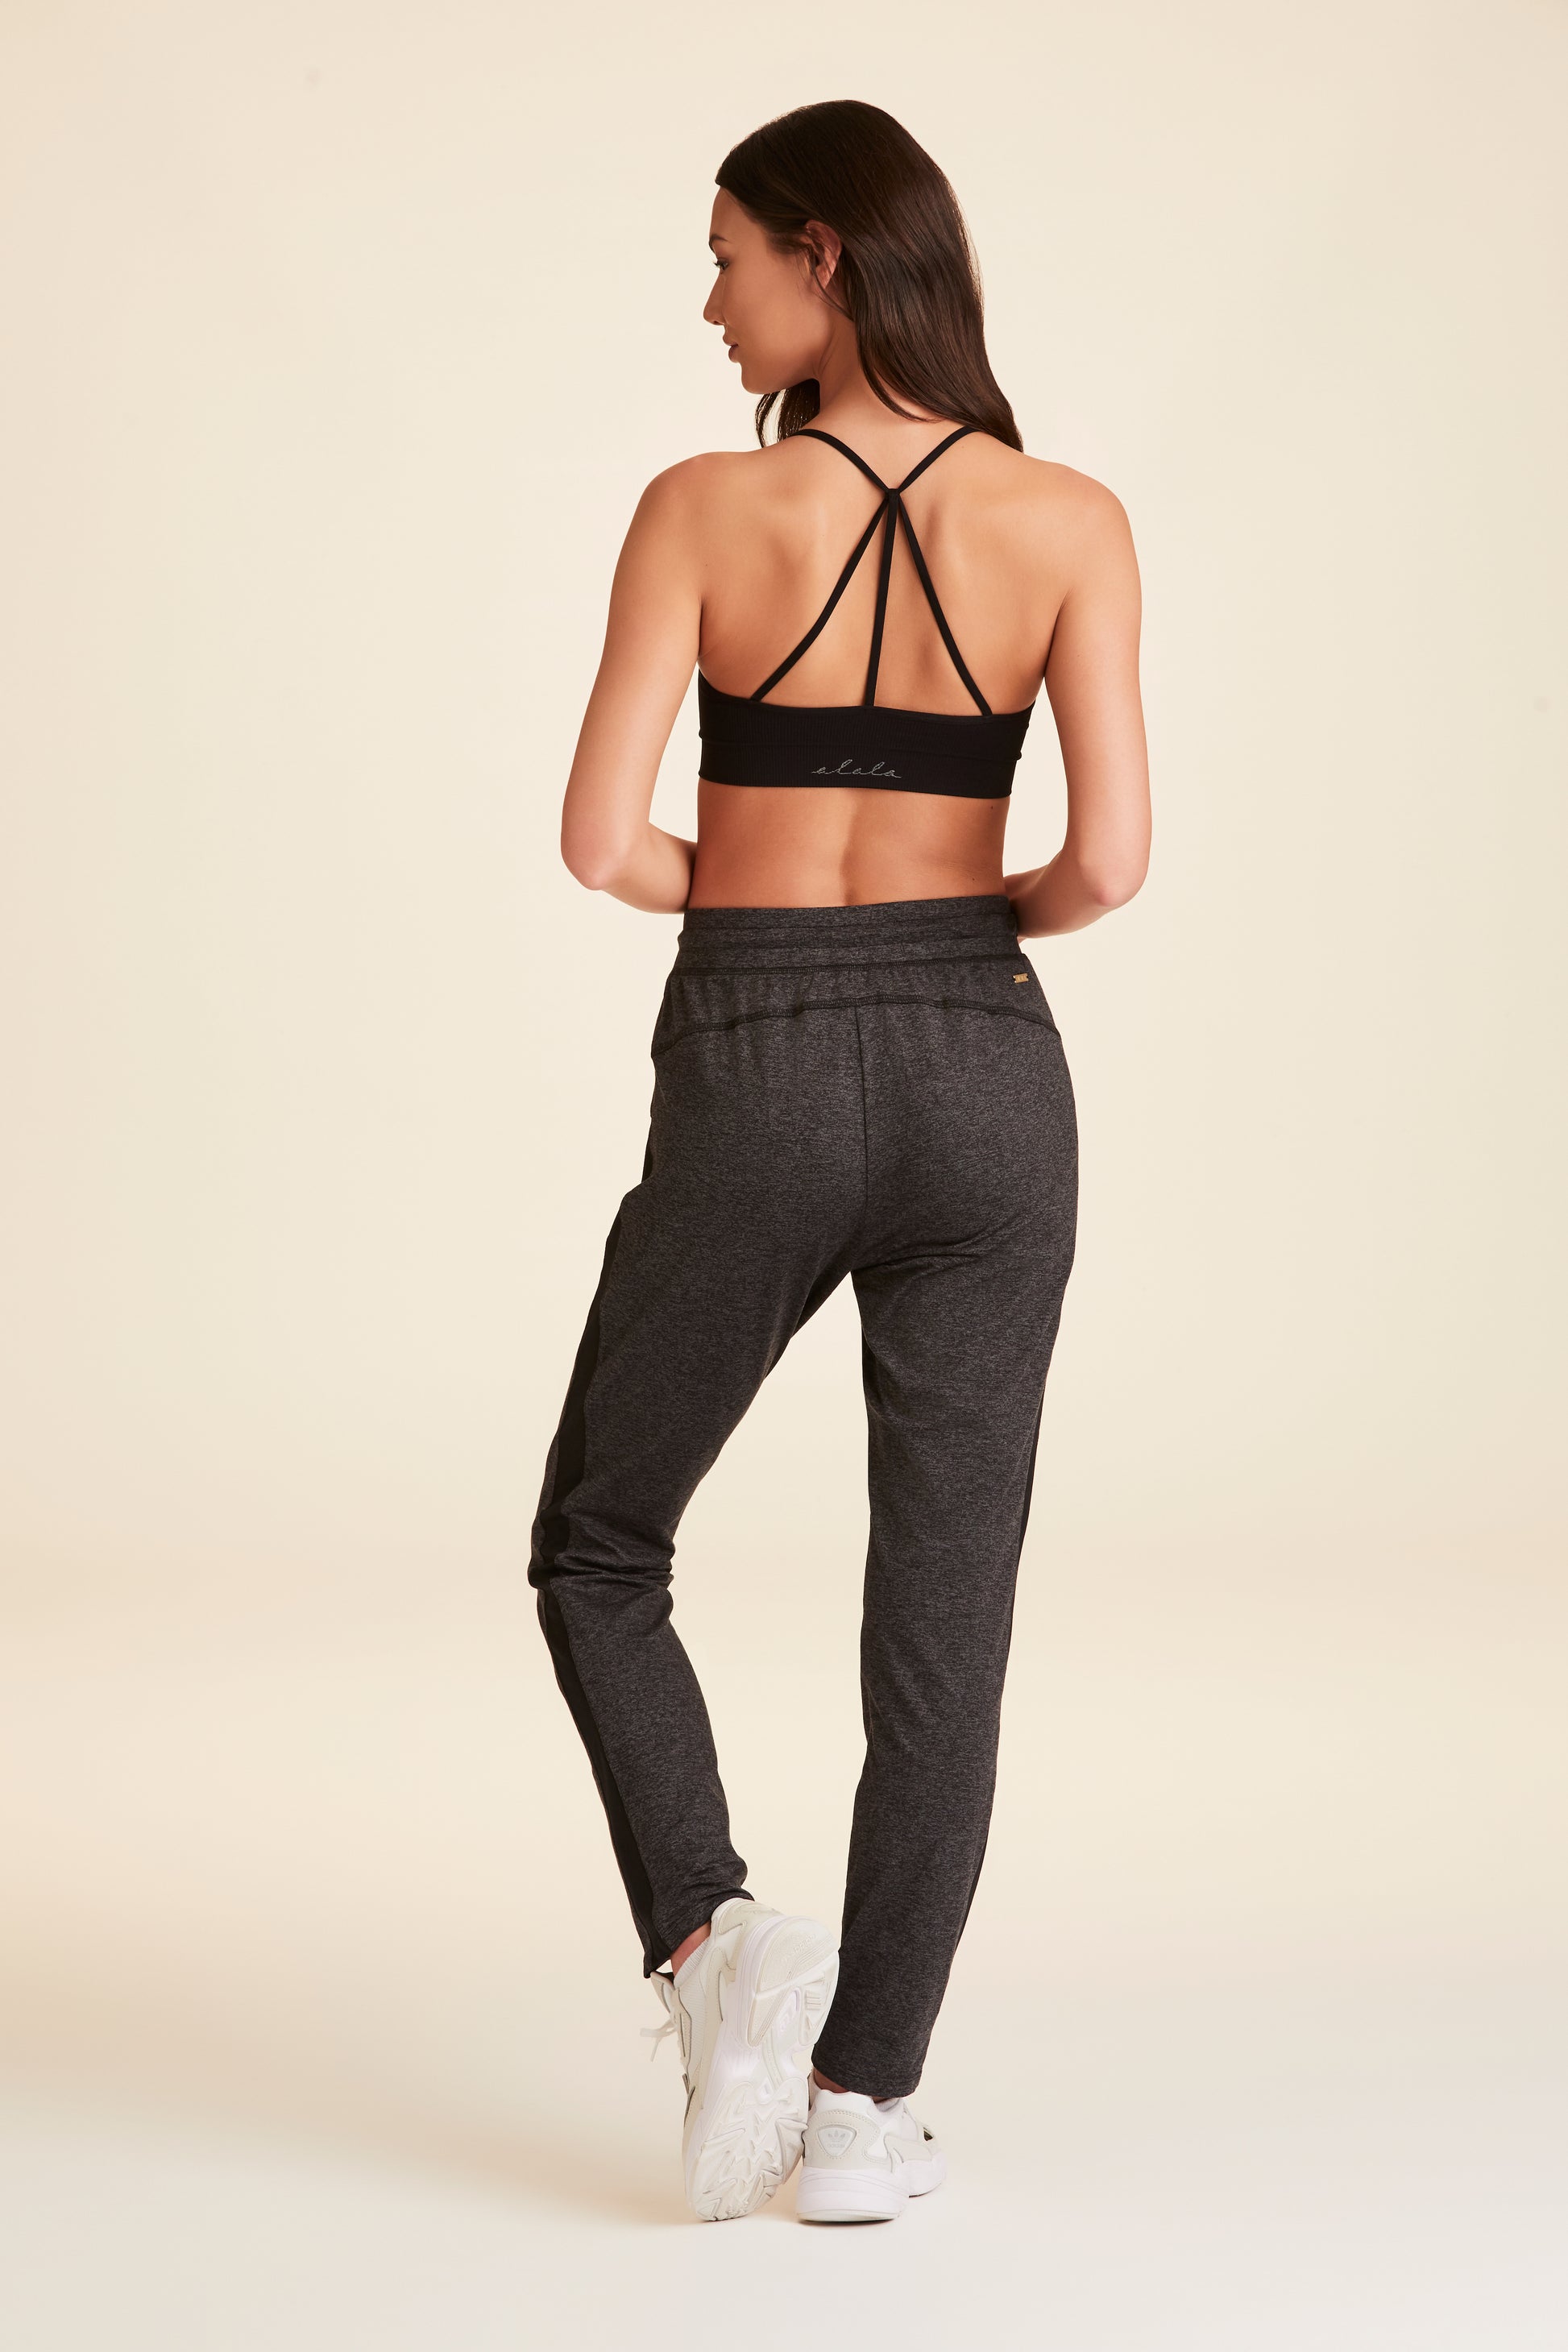 Women's Leggings Tagged Pants - Old Navy Philippines